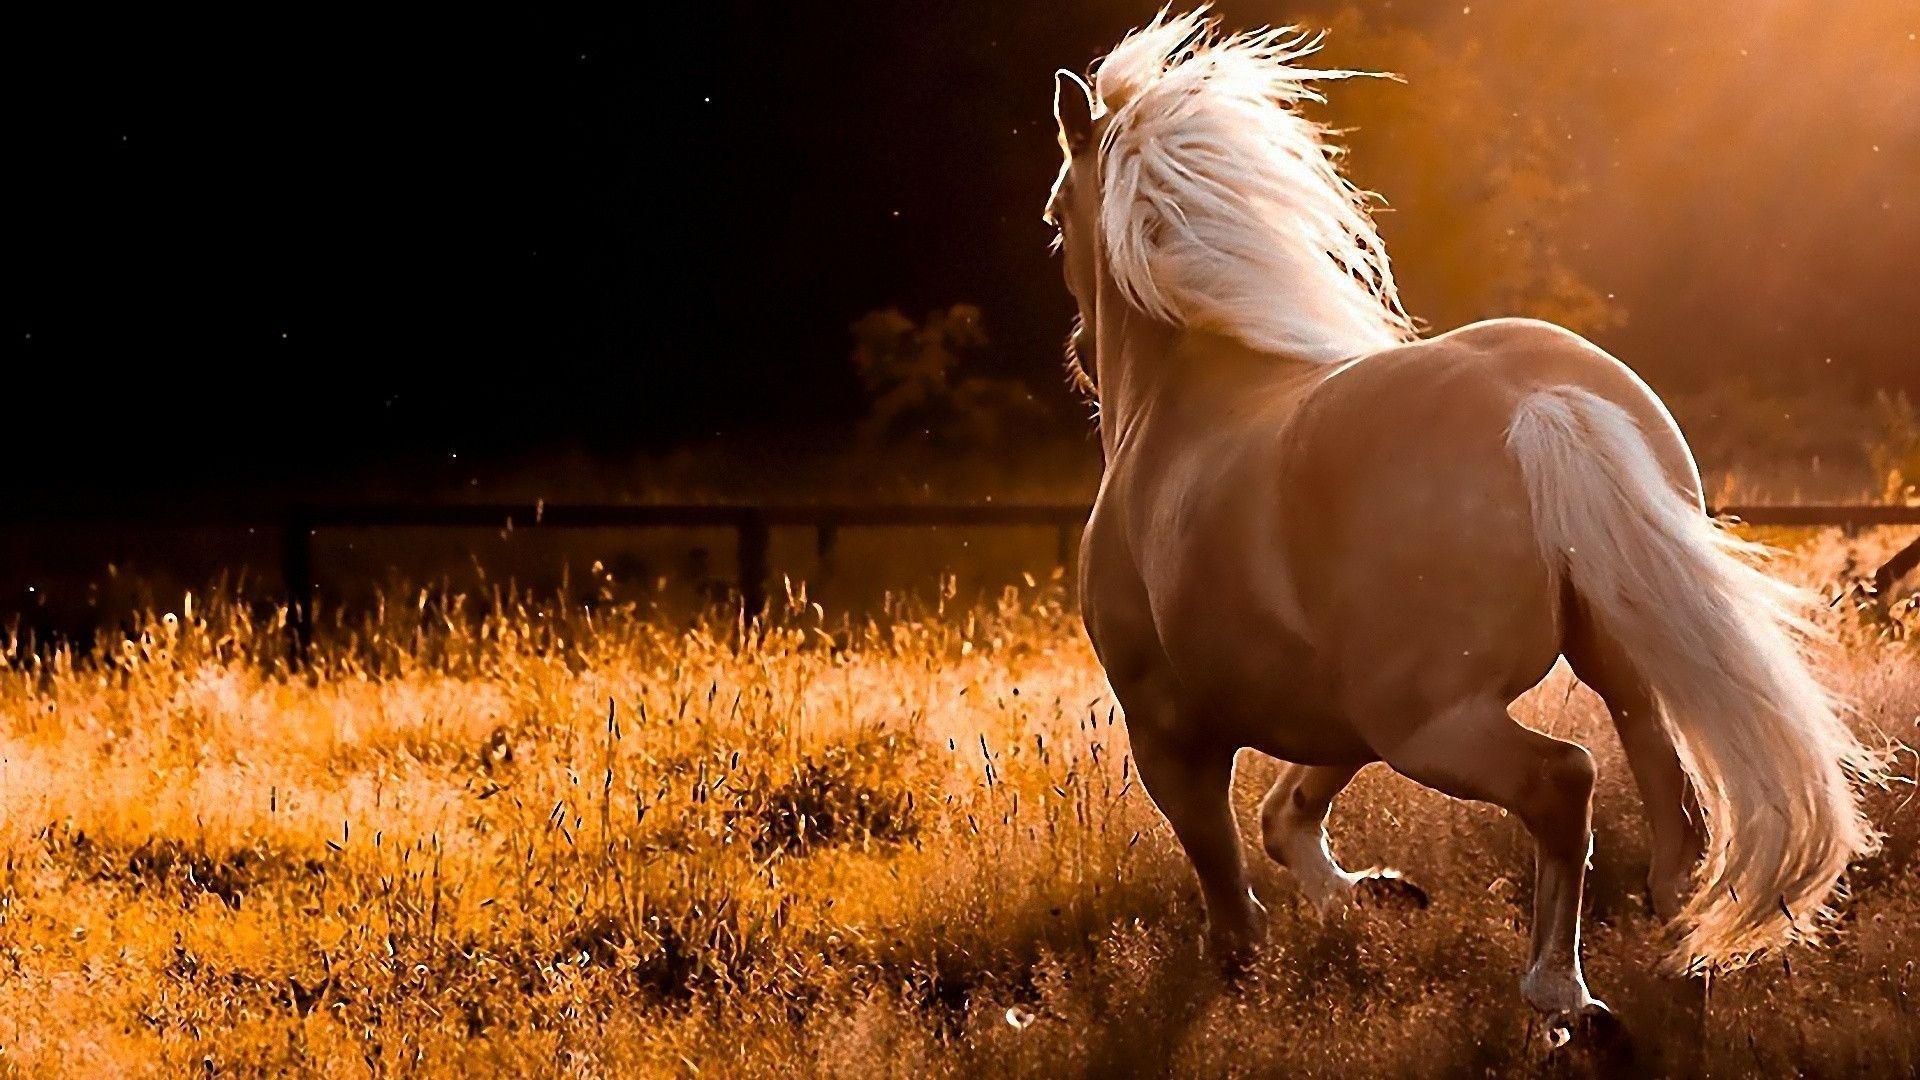 Free horse wallpapers for puter